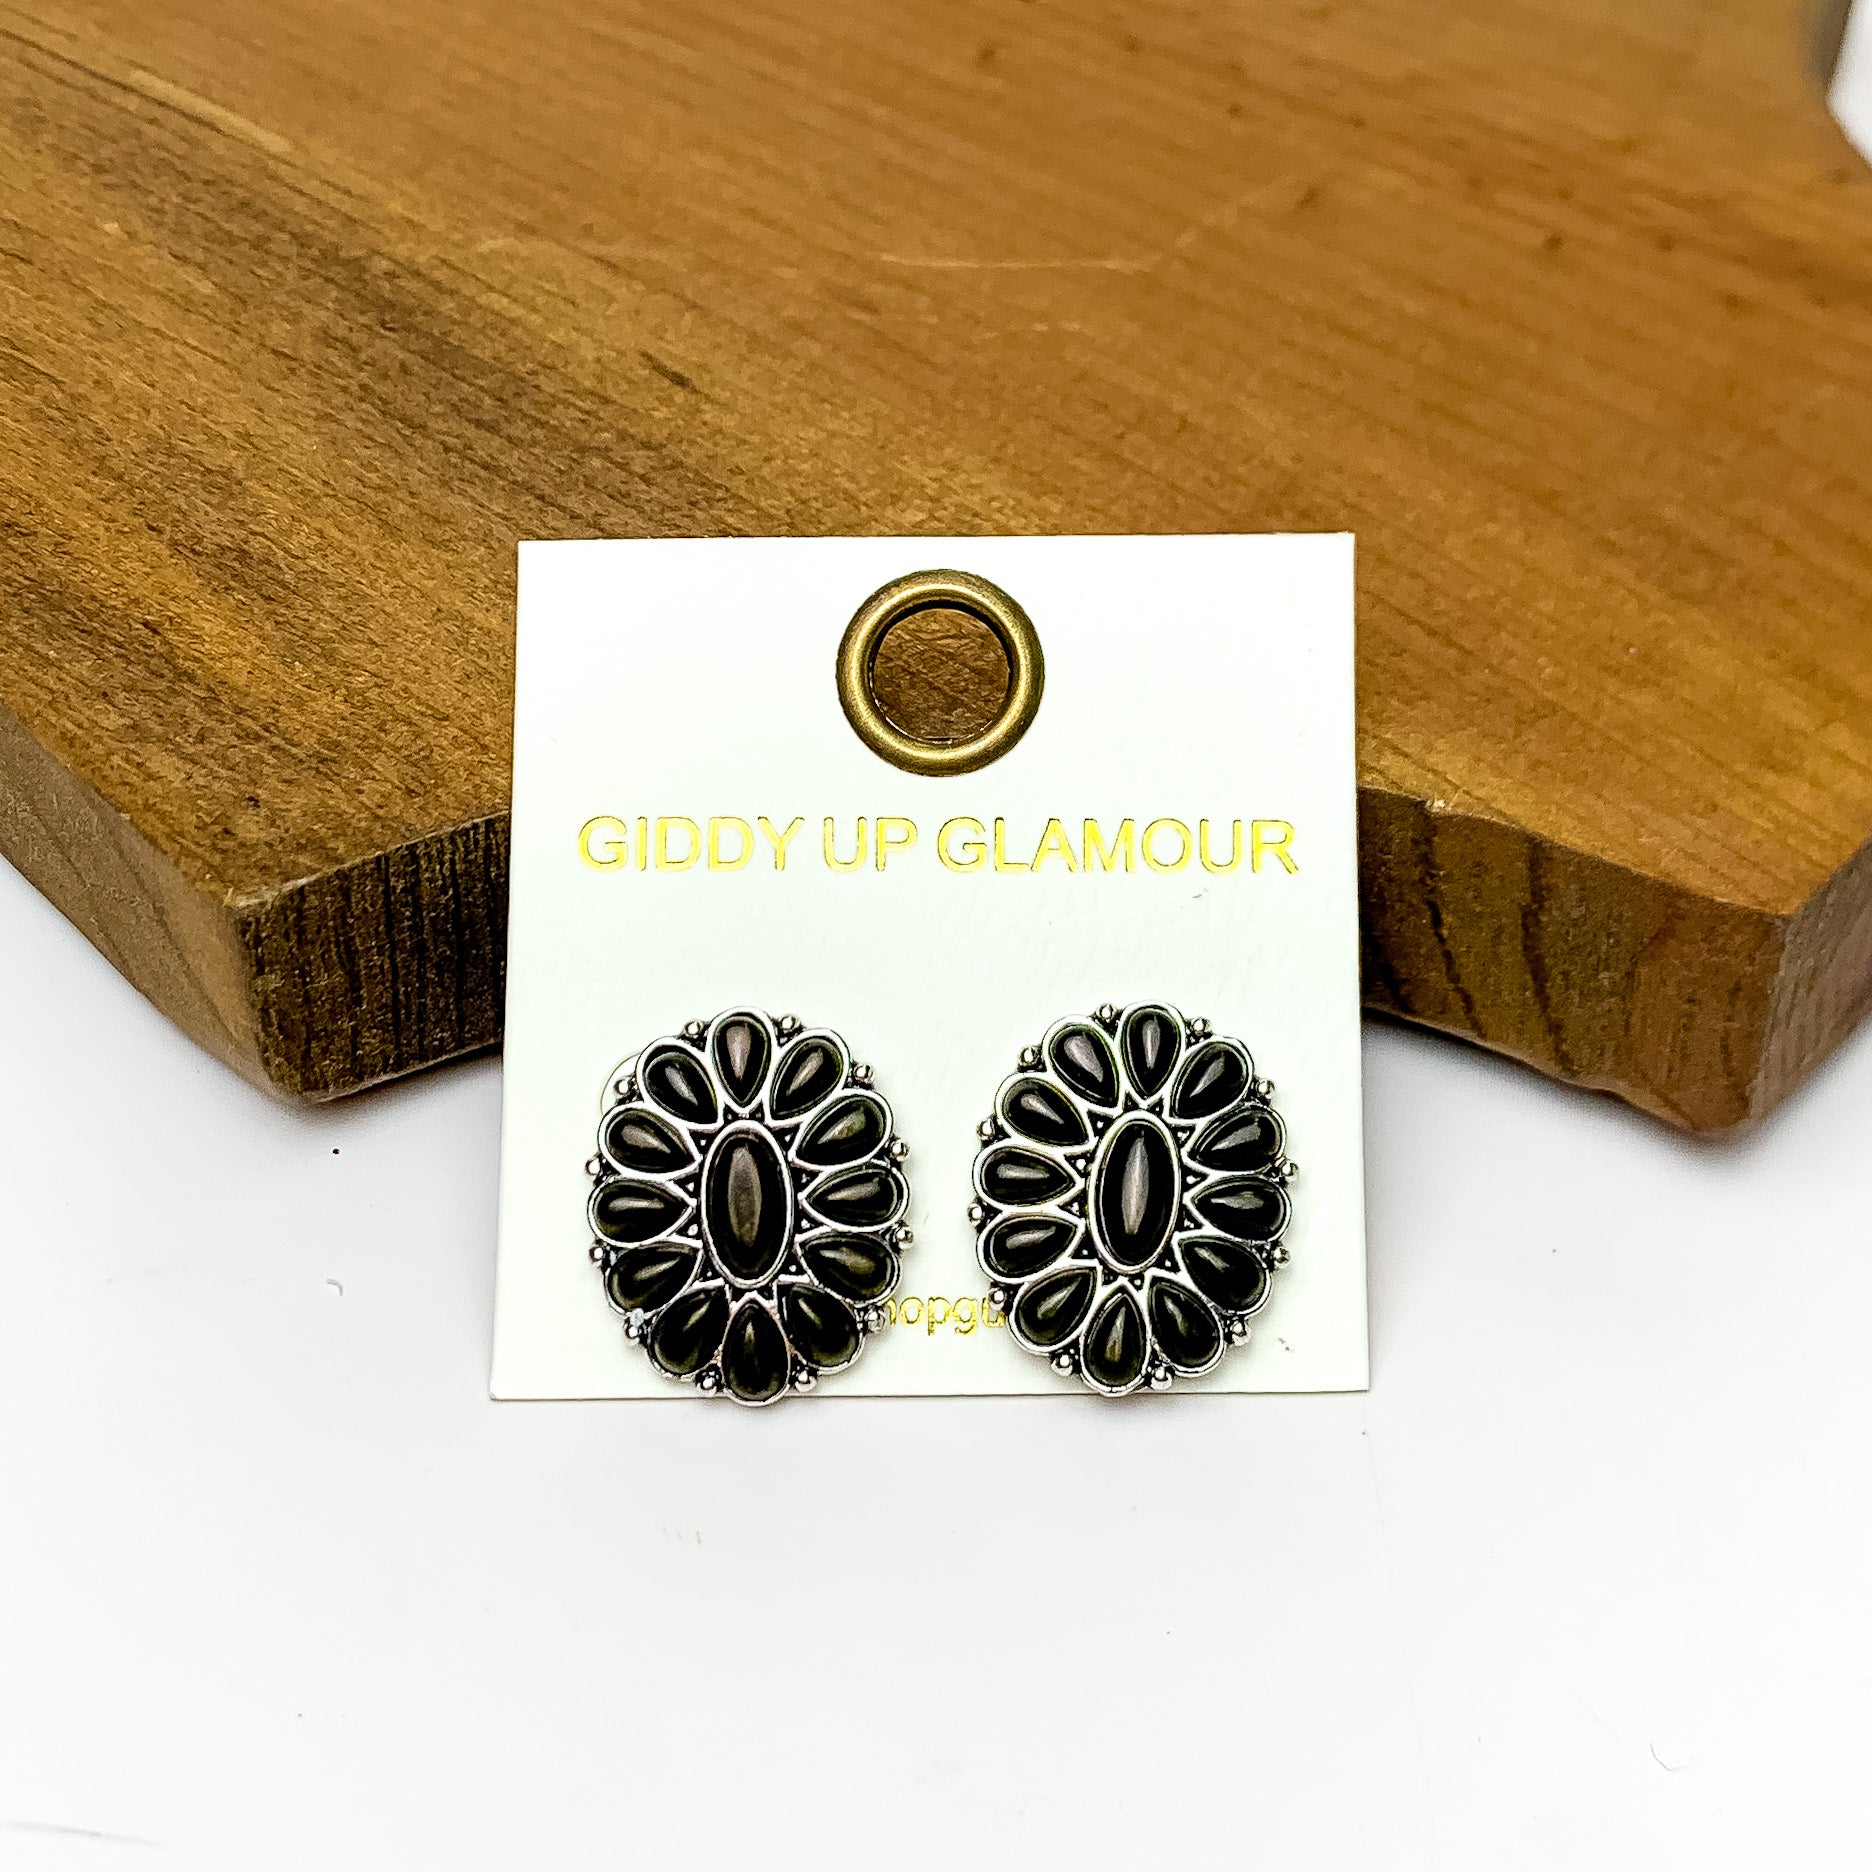 Silver Tone Concho Cluster Oval Earrings in Black. Pictured on a white background with the earrings laying against a wood piece.